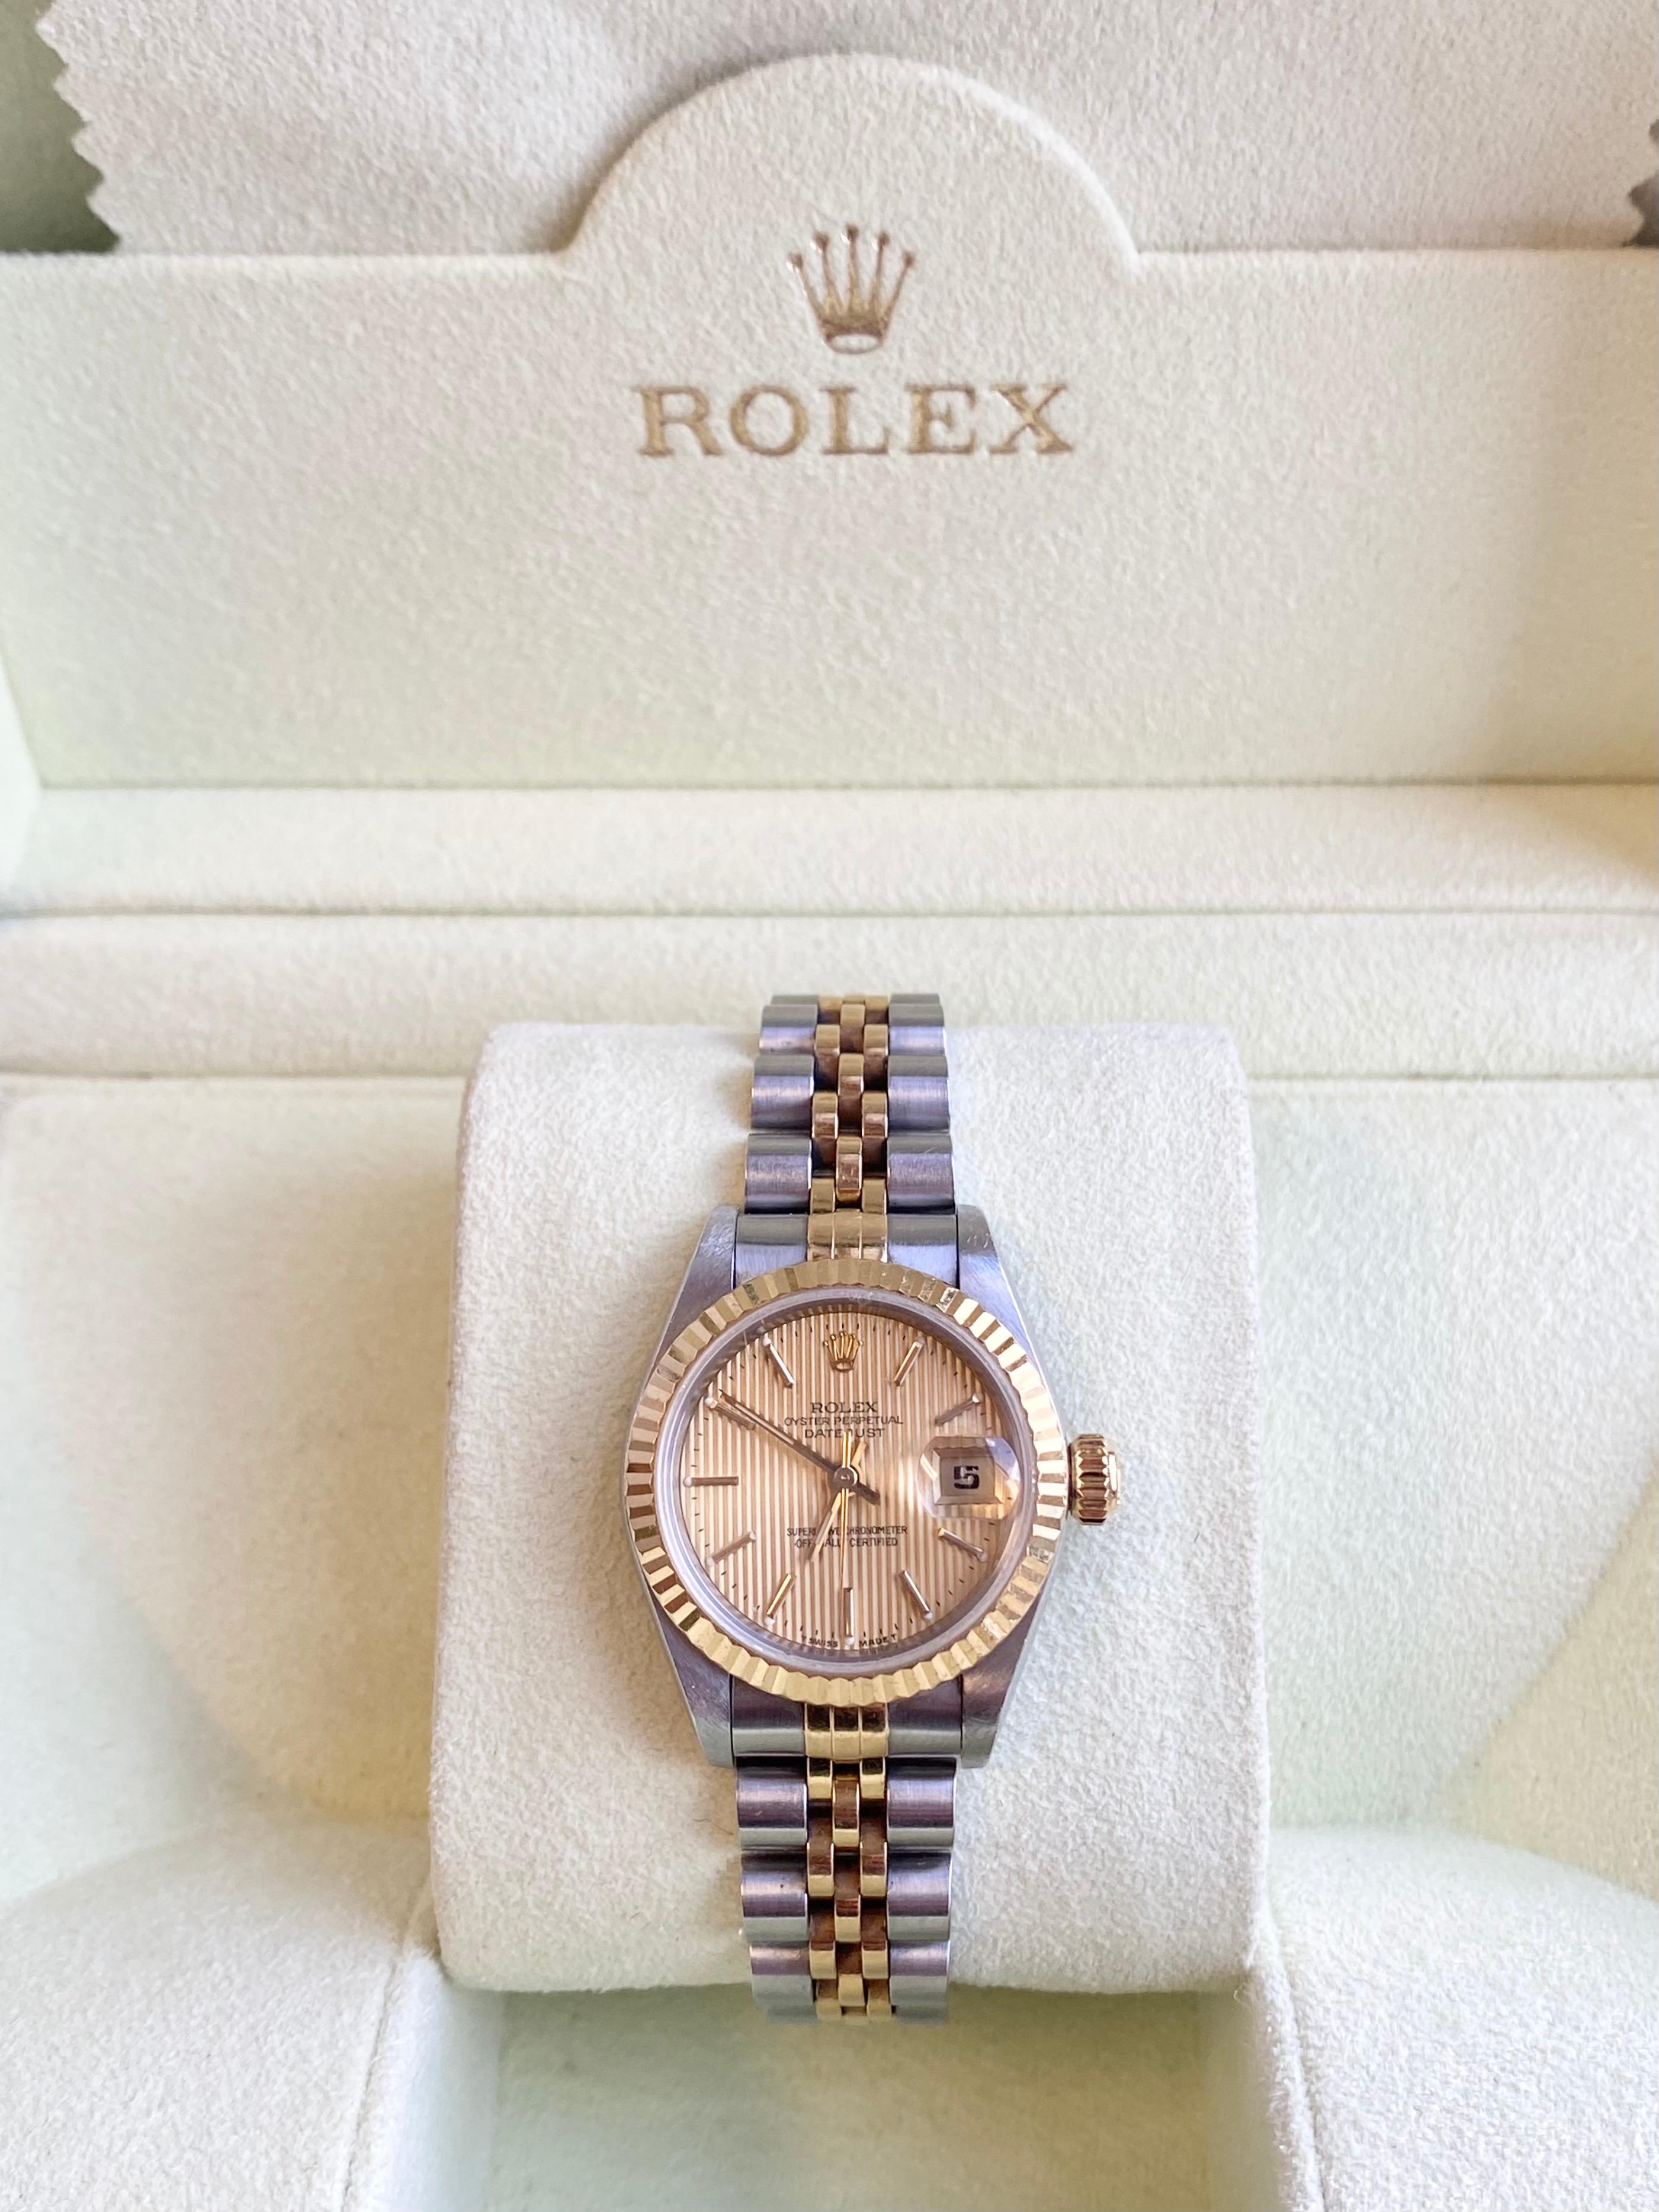 Rolex Ladies DateJust with gold fluted bezel and textured gold stick marker dial. Fitting for everyday wear or special occasions, this watch's quality is unrivaled. A classic among Rolex timepieces with an aesthetic that has passed the test of time